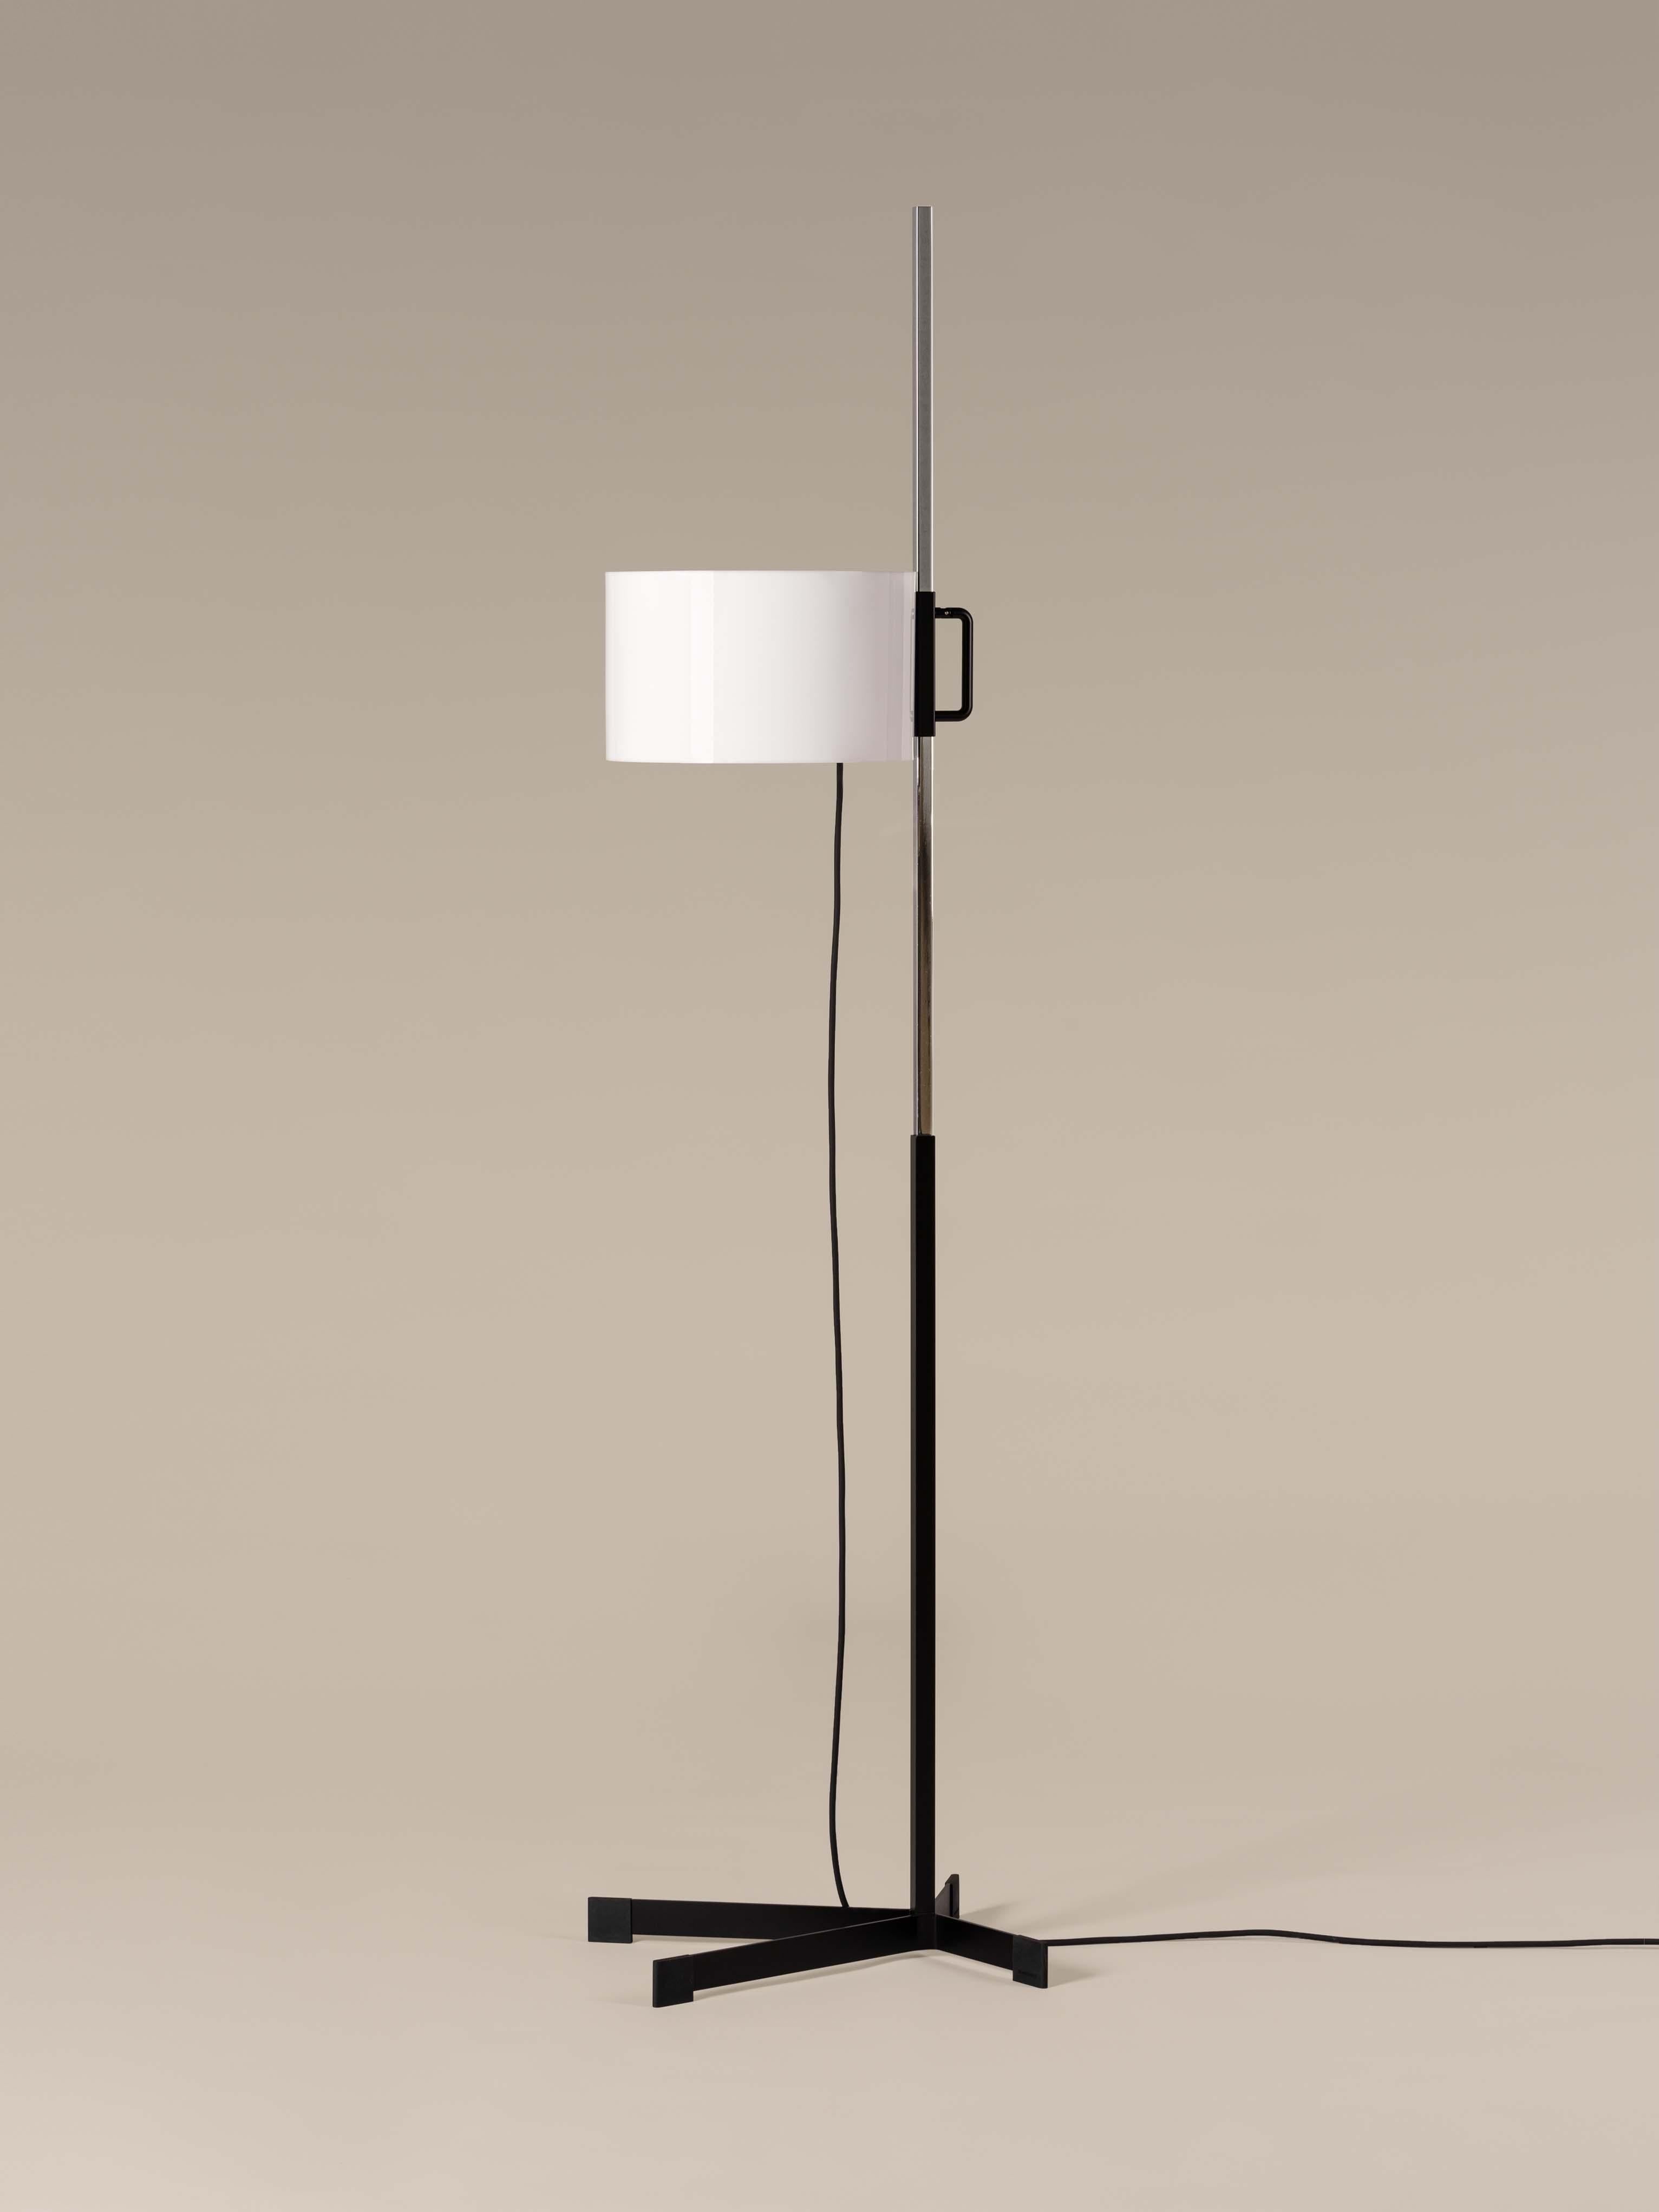 TMC floor lamp by Miguel Milá
Dimensions: D 30 x W 40 x H 171 cm
Materials: Metal, plastic.

In an exquisite show of intelligence and good taste, this representative of the adjustable TM series is the most elegant version, further embellished by